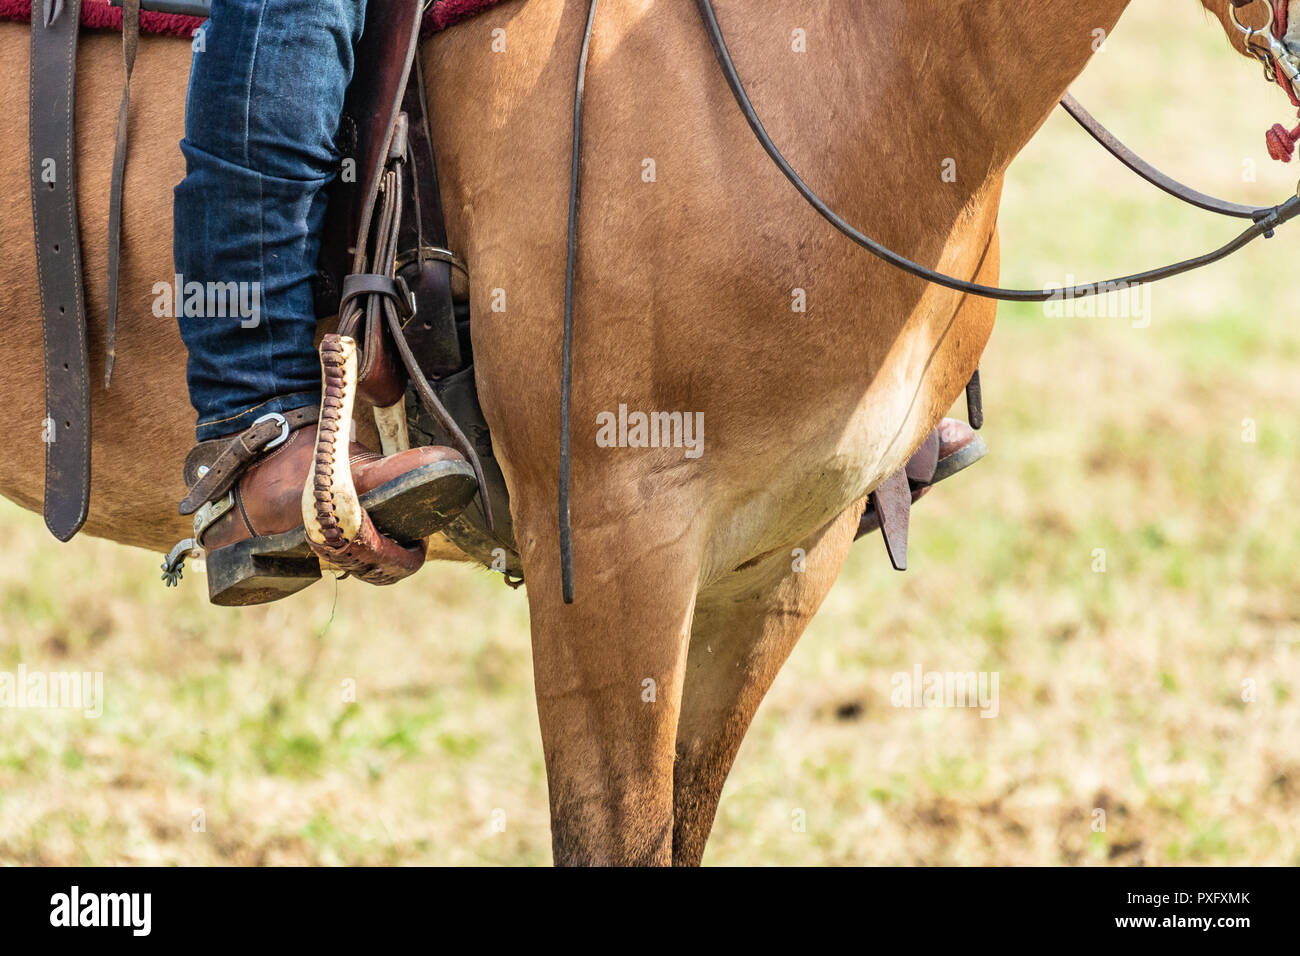 Horse rider with knife and blue jeans. Scenes from a rodeo and equestrian show, warming up phase, details of saddles, clothing, stirrups and brown hor Stock Photo